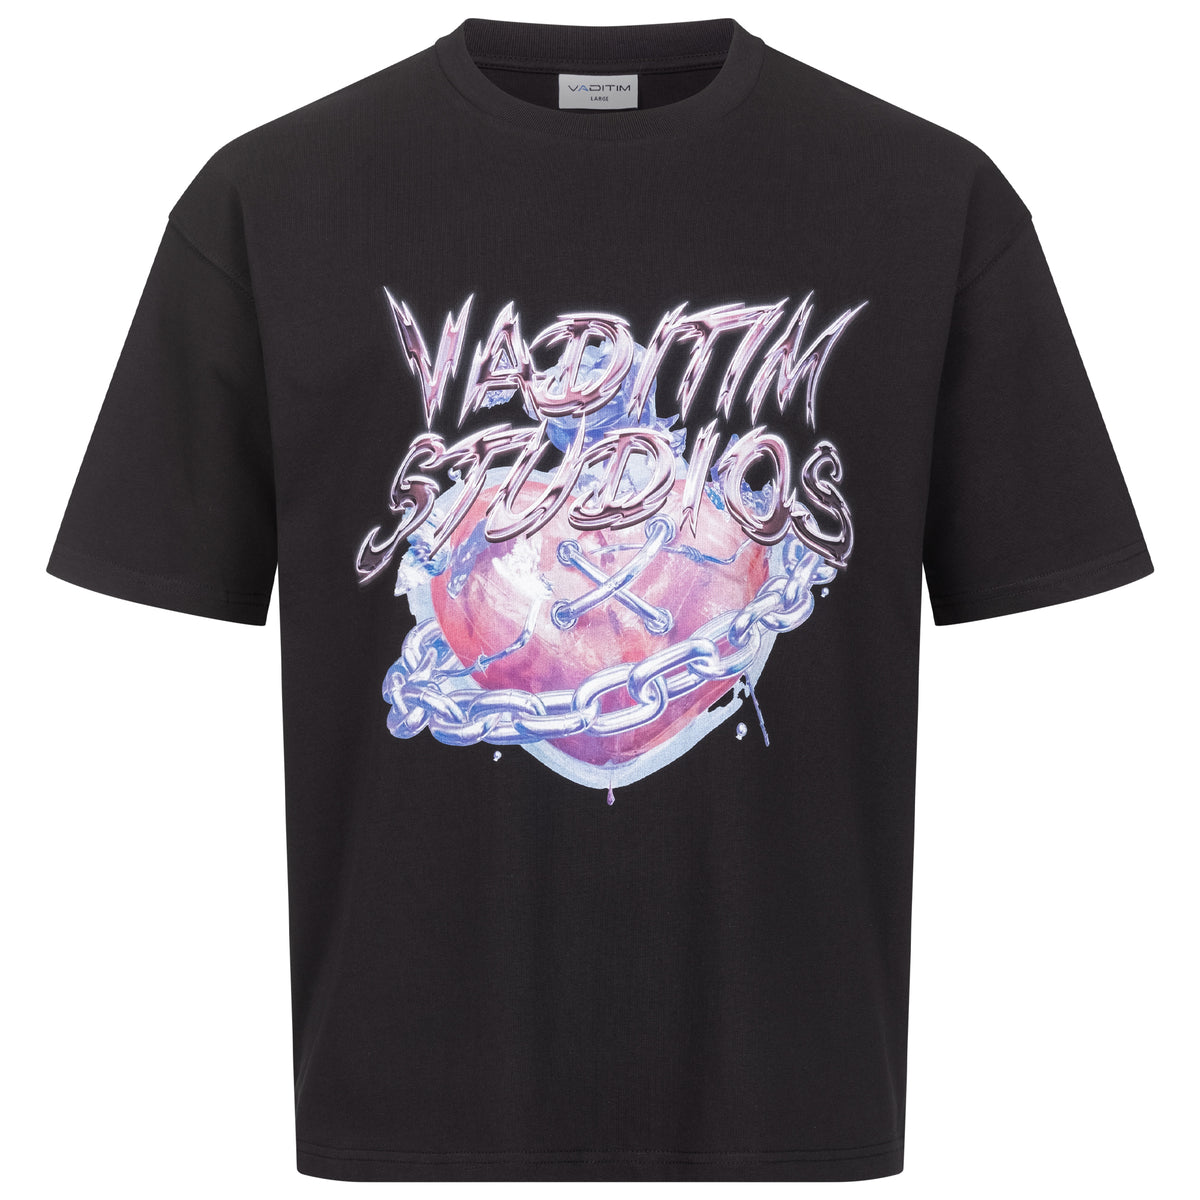 Trapped Heart T-Shirt  Vaditim   